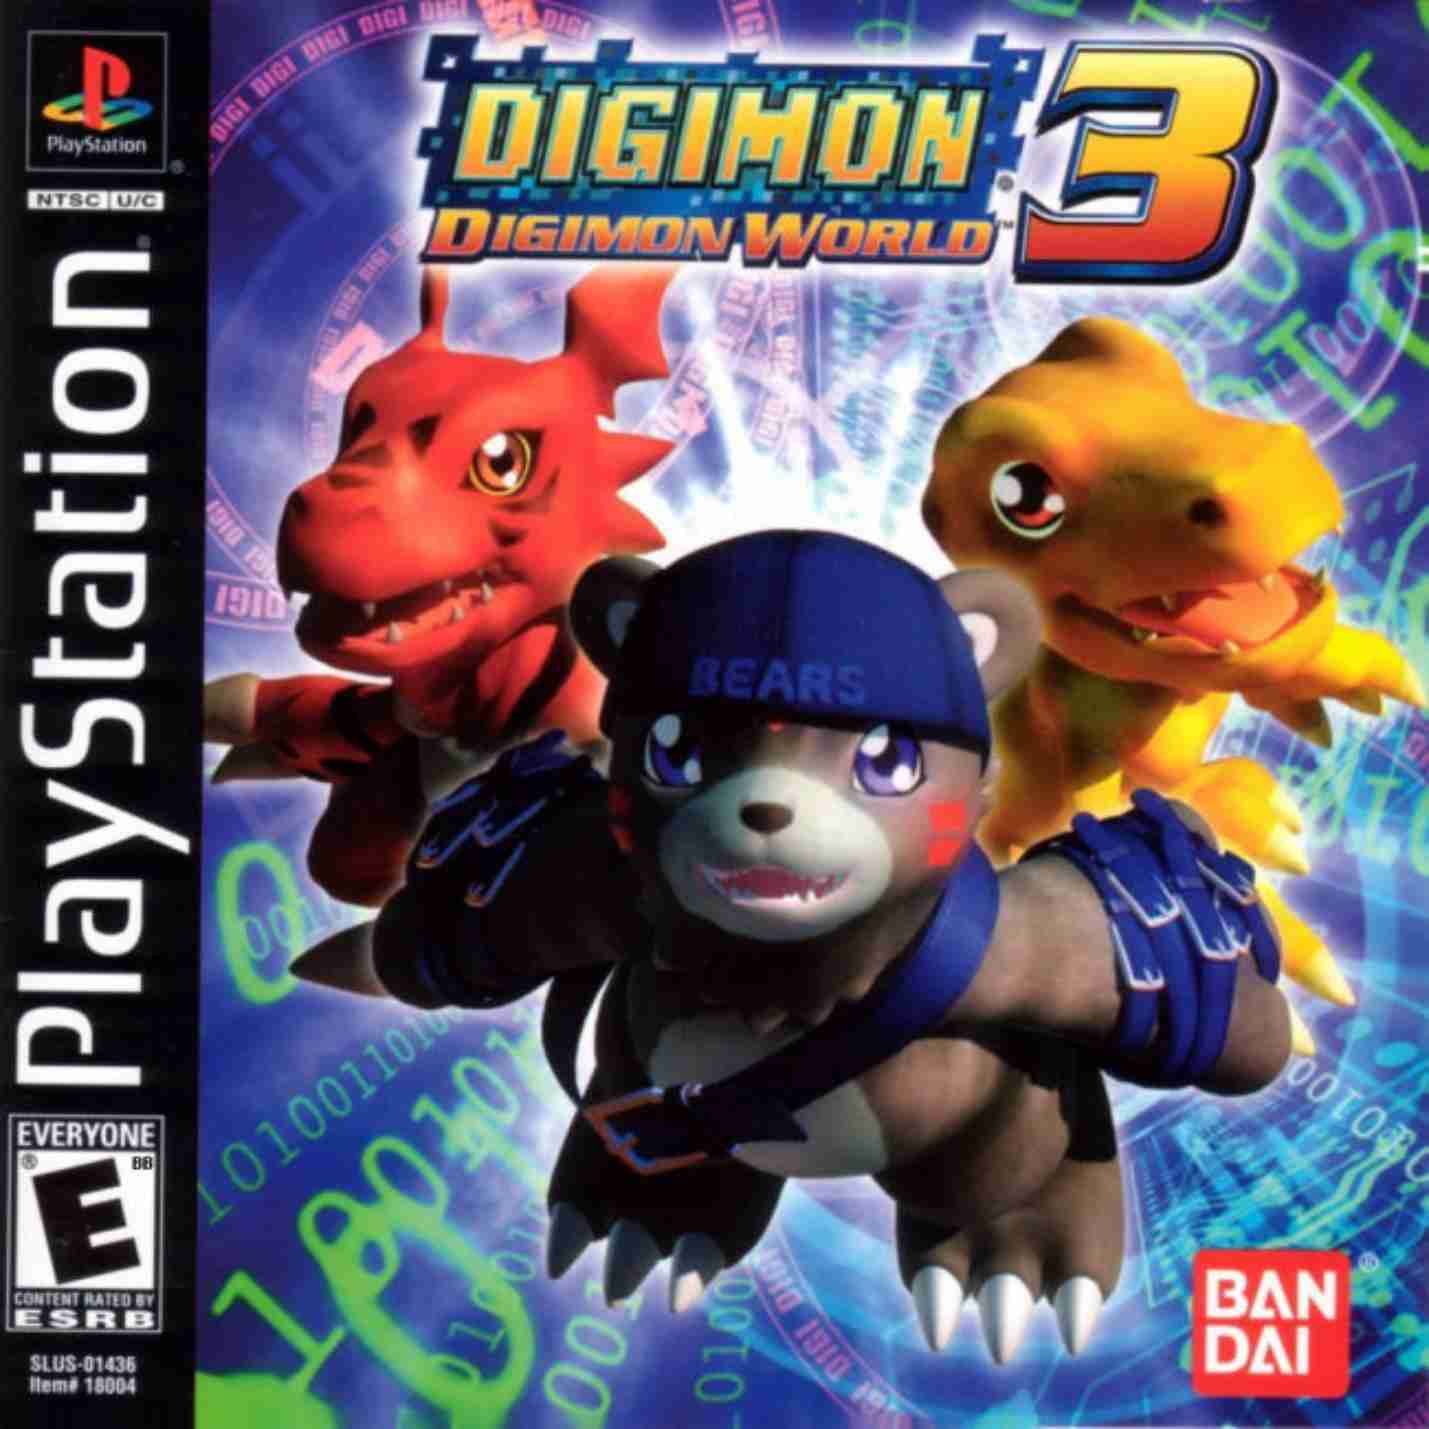 best ps1 games ever